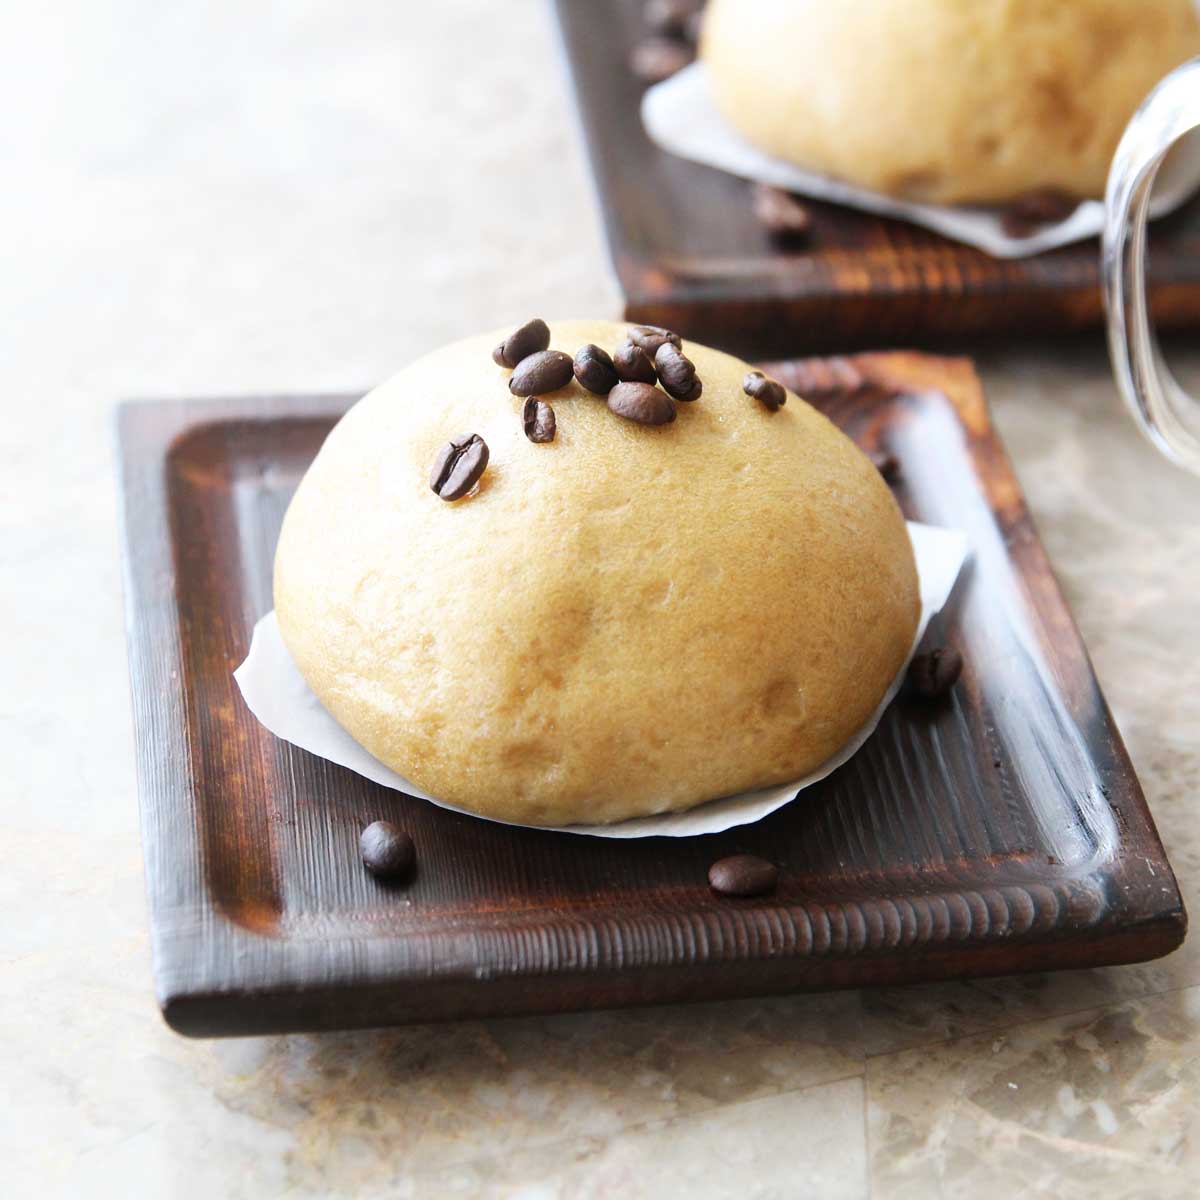 Easy Coffee & Almond Milk Steamed Buns with Creamy Coffee Paste Filling - Pistachio Nice Cream